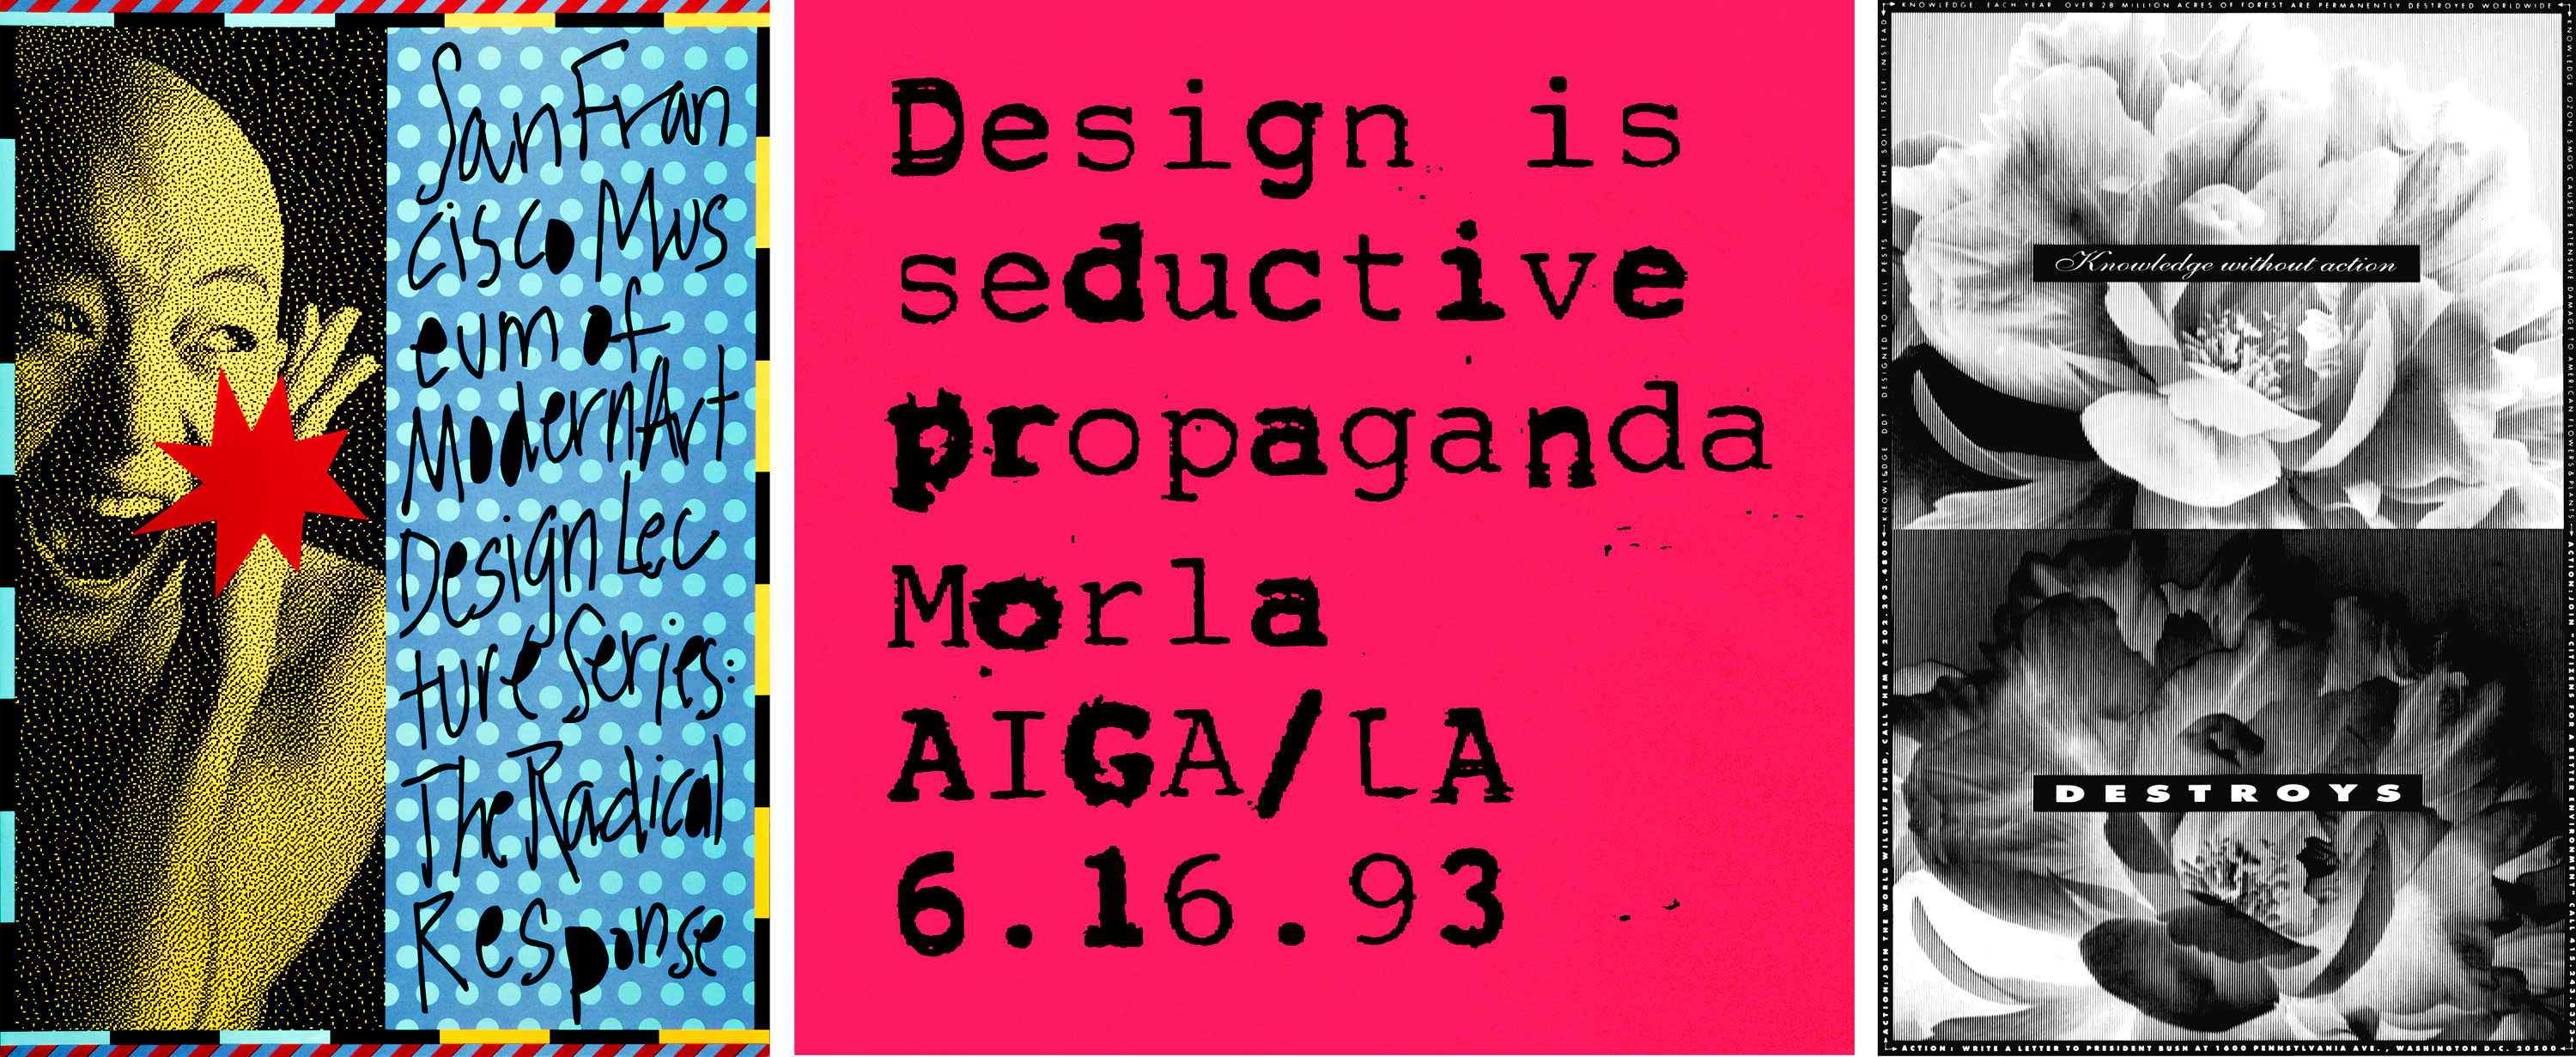 Left to Right: AIGA for SFMOMA Lecture Series; Morla Design Lecture for AIGA Los Angeles (cropped); Environmental Poster for AIGA